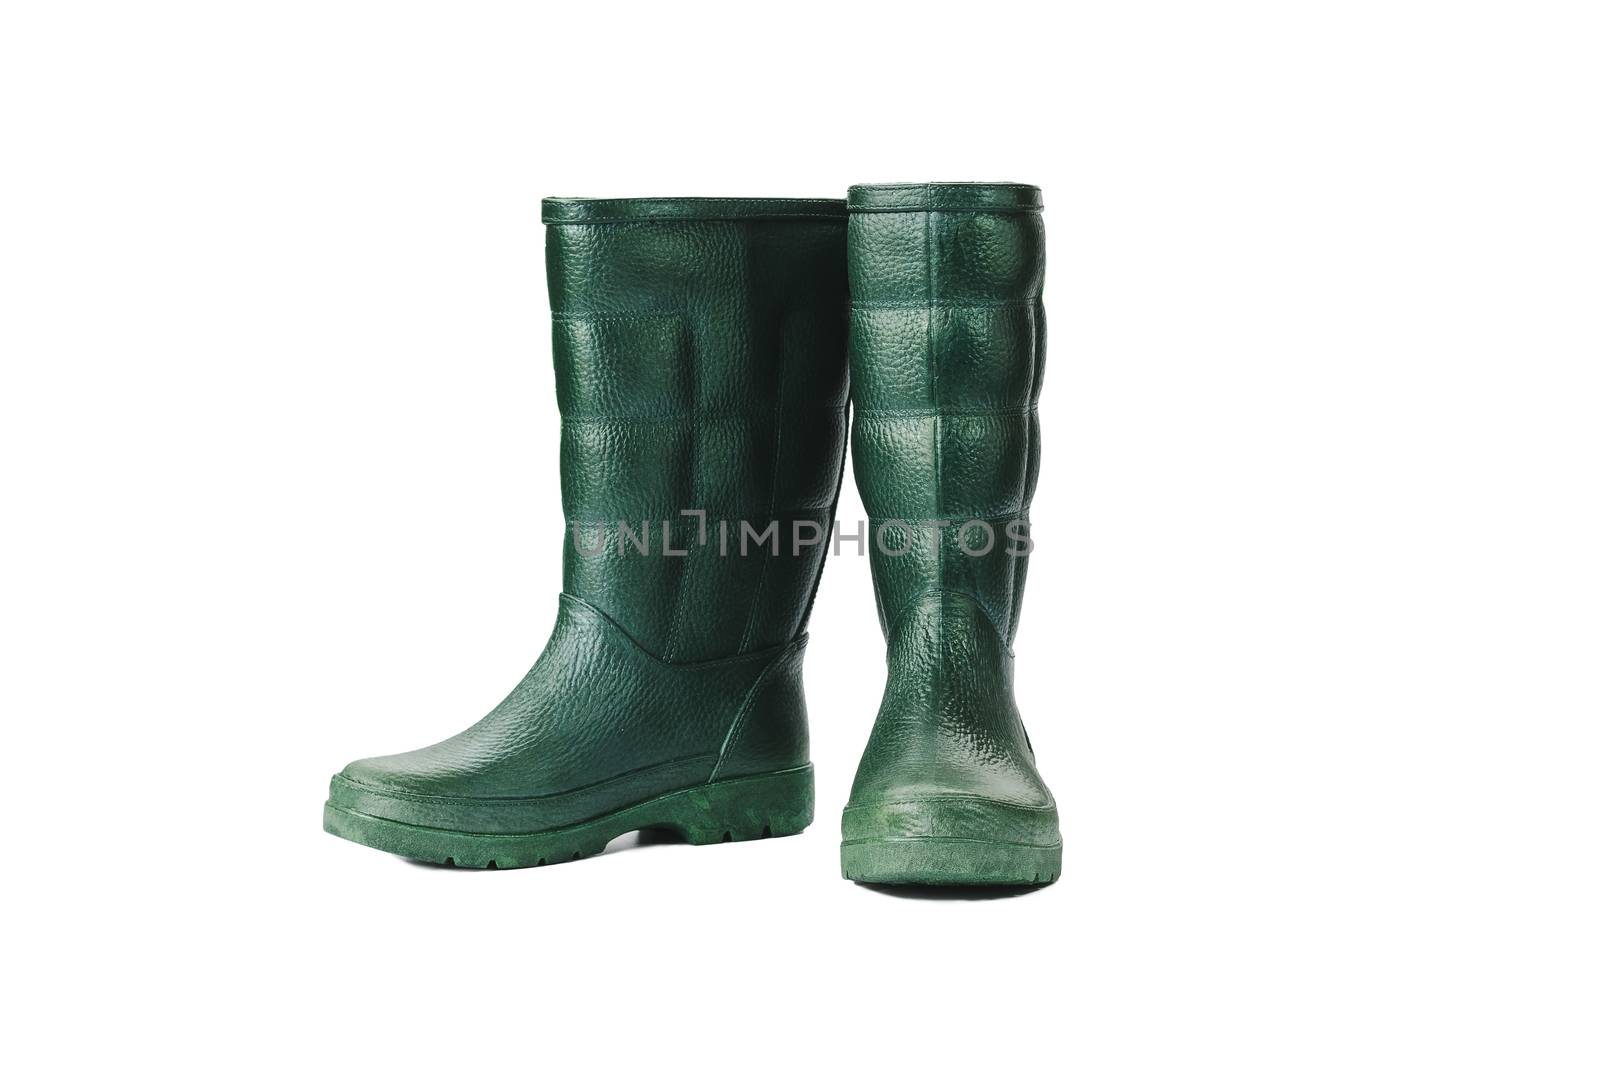 Rubber boots waterproof isolated  by wattanaphob